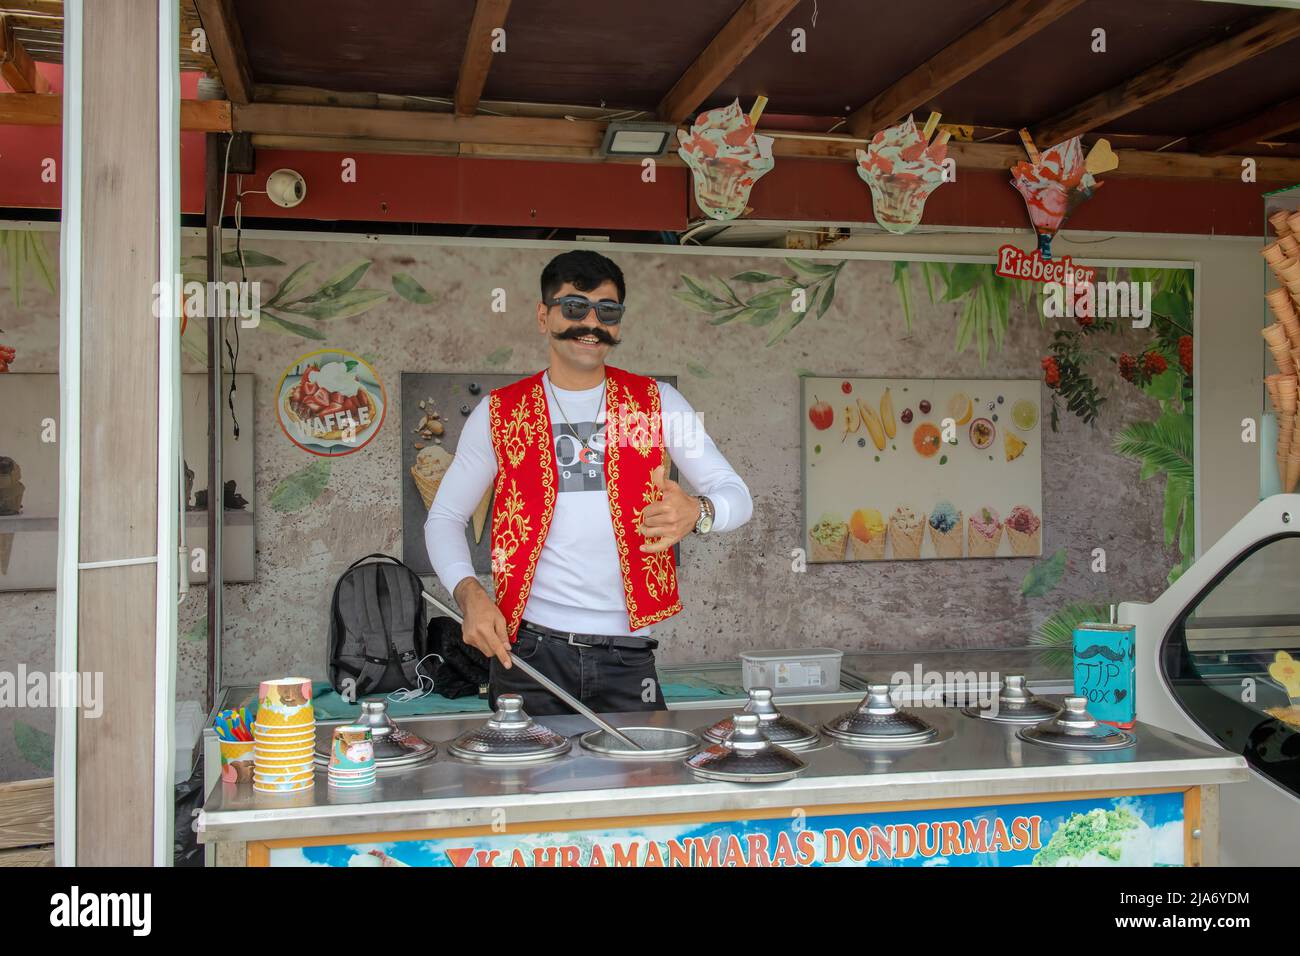 The Turkish Ice cream street vendor sporting traditional dress and moustache. Stock Photo